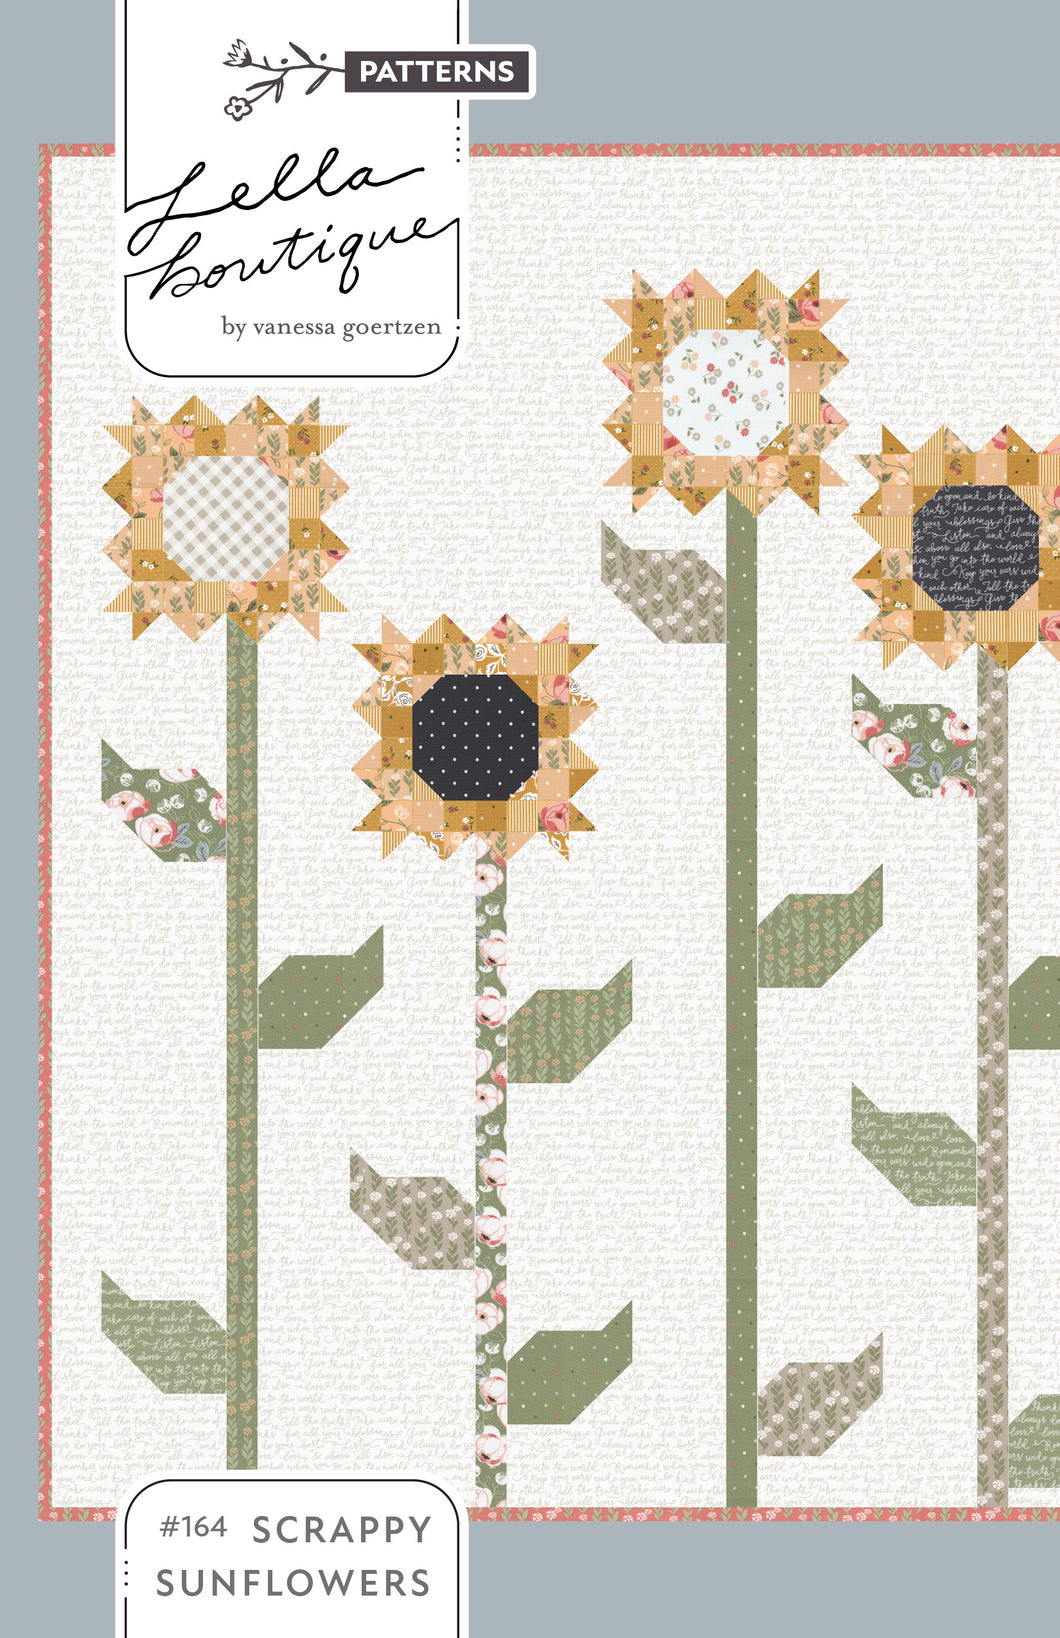 Scrappy Sunflowers quilt by Lella Boutique. Fabric is Country Rose by Lella Boutique for Moda Fabrics. Download the PDF here.